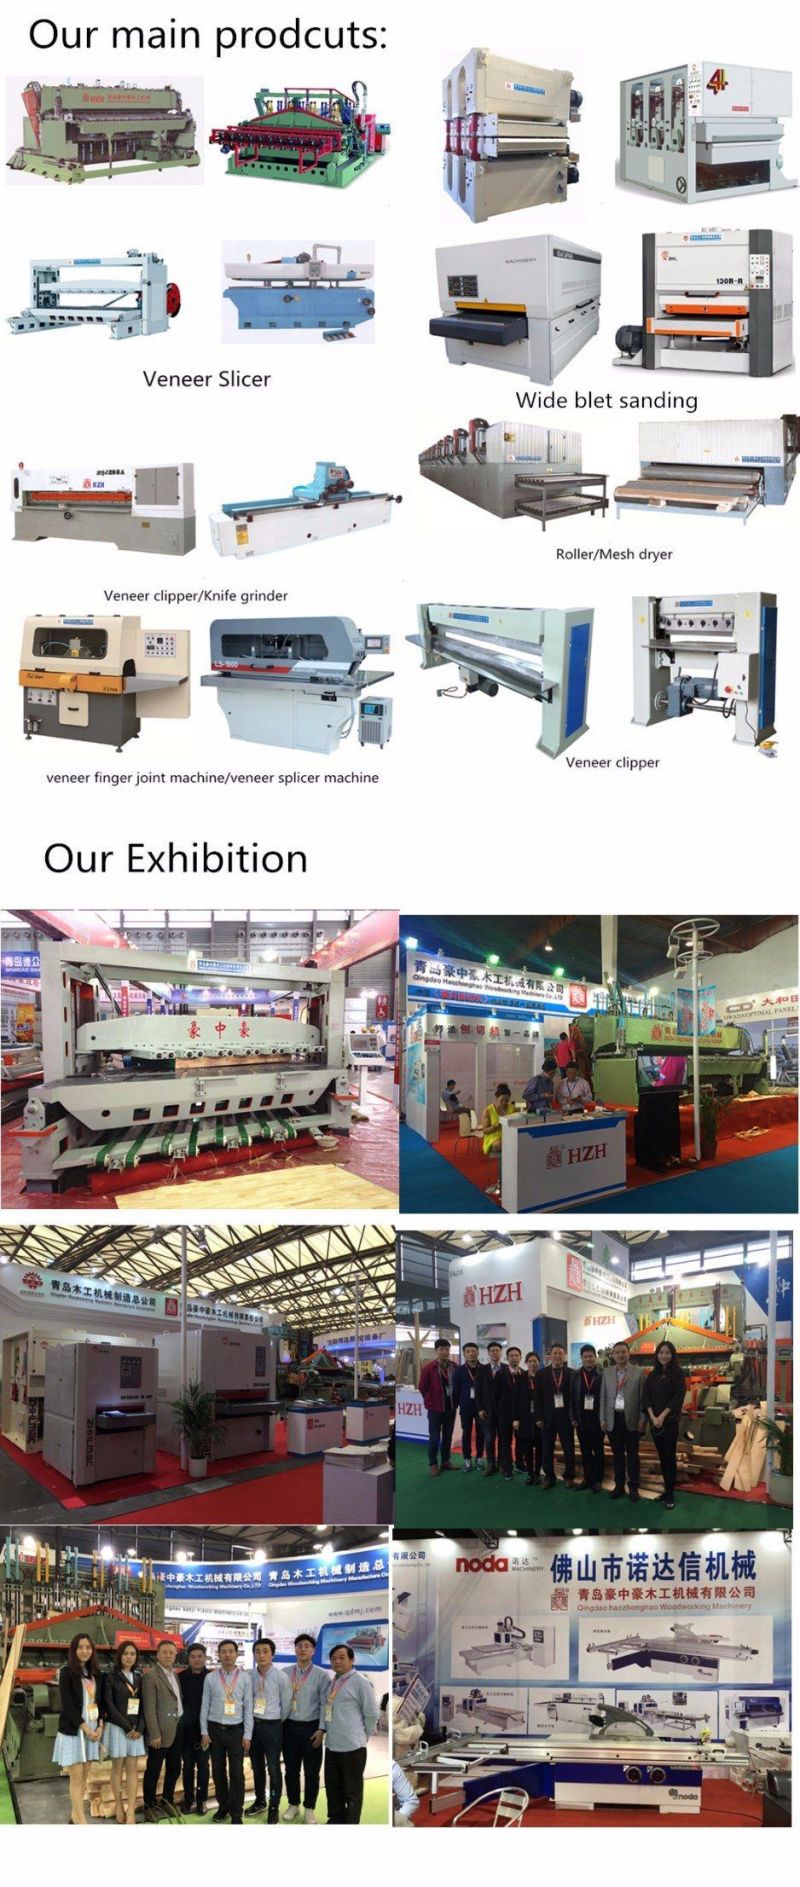 Woodworking Machinery Automatic Tool Blade Change Store System Atc Drilling Router Center CNC Cutting Machine